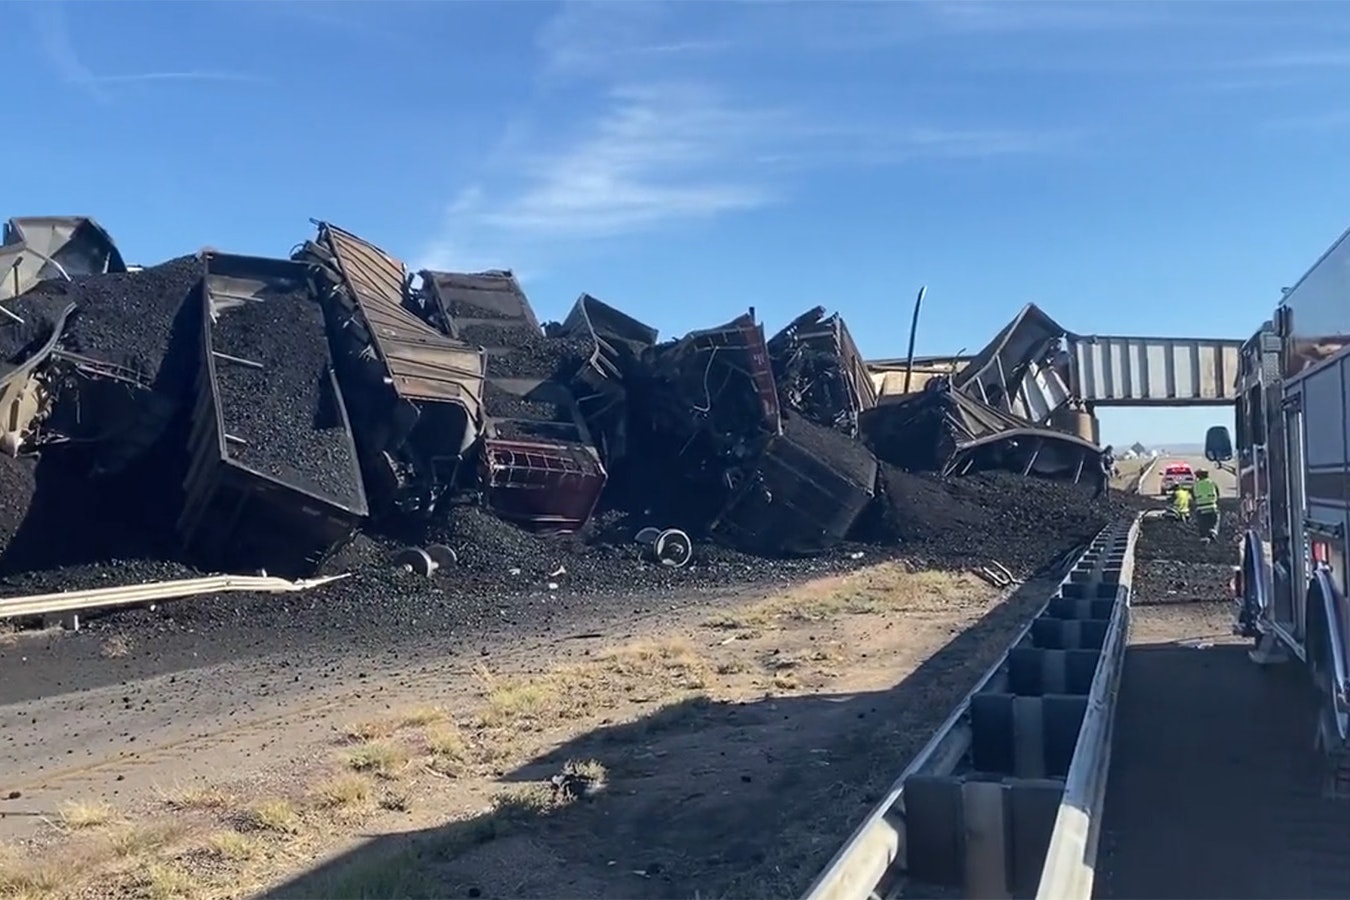 A train loaded with coal from Wyoming's Powder River Basin crashed Sunday afternoon near Pueblo, Colorado, when a track on bridge over Interstate 25 failed, causing the train to derail and bridge to collapse.